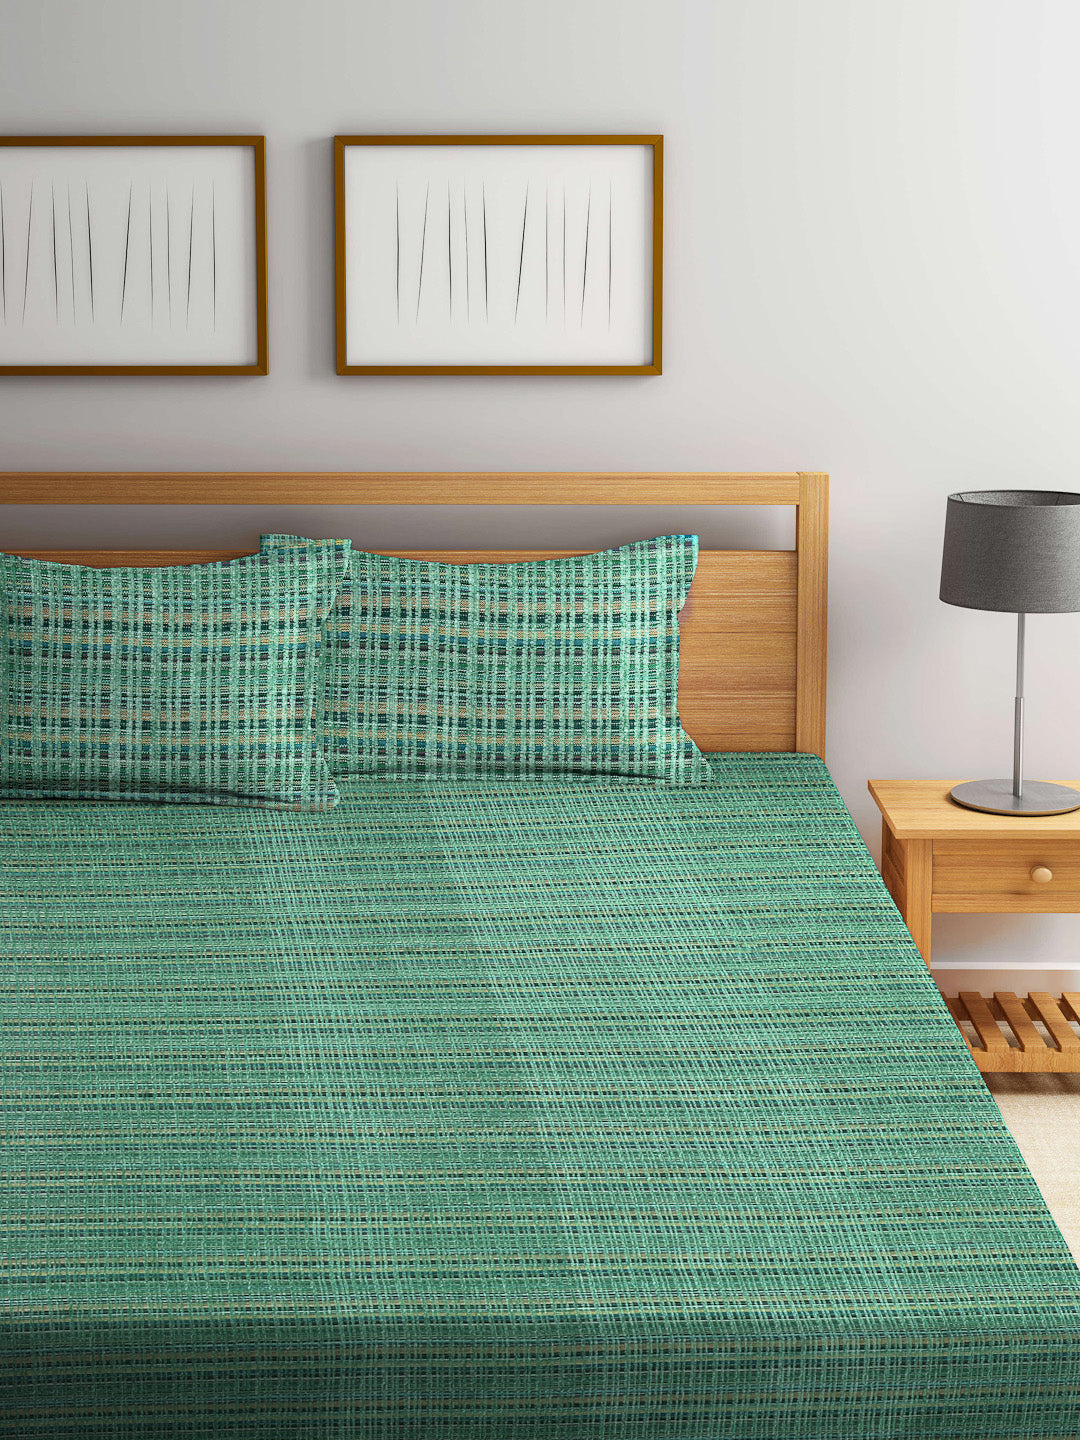 Arrabi Green Stripes Handwoven Cotton King Size Bedsheet with 2 Pillow Covers (260 X 230 cm)